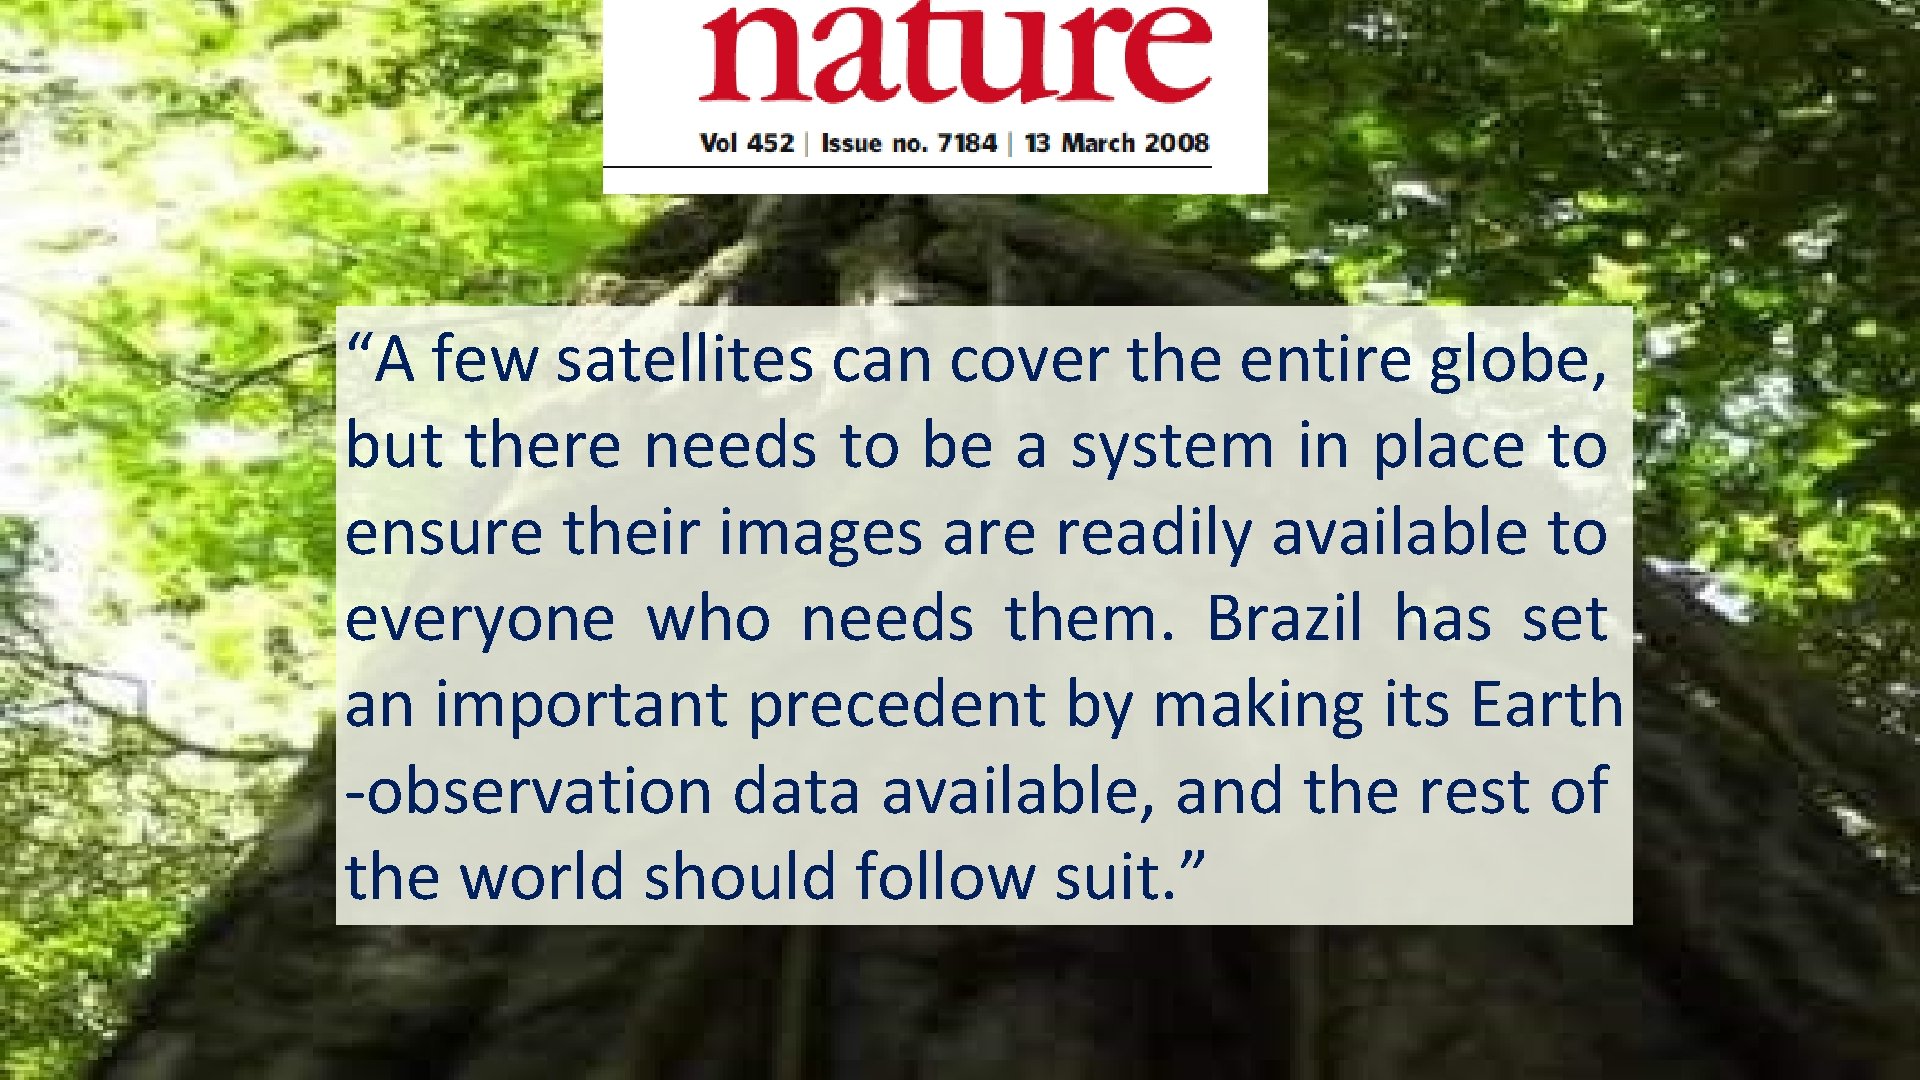 “A few satellites can cover the entire globe, but there needs to be a